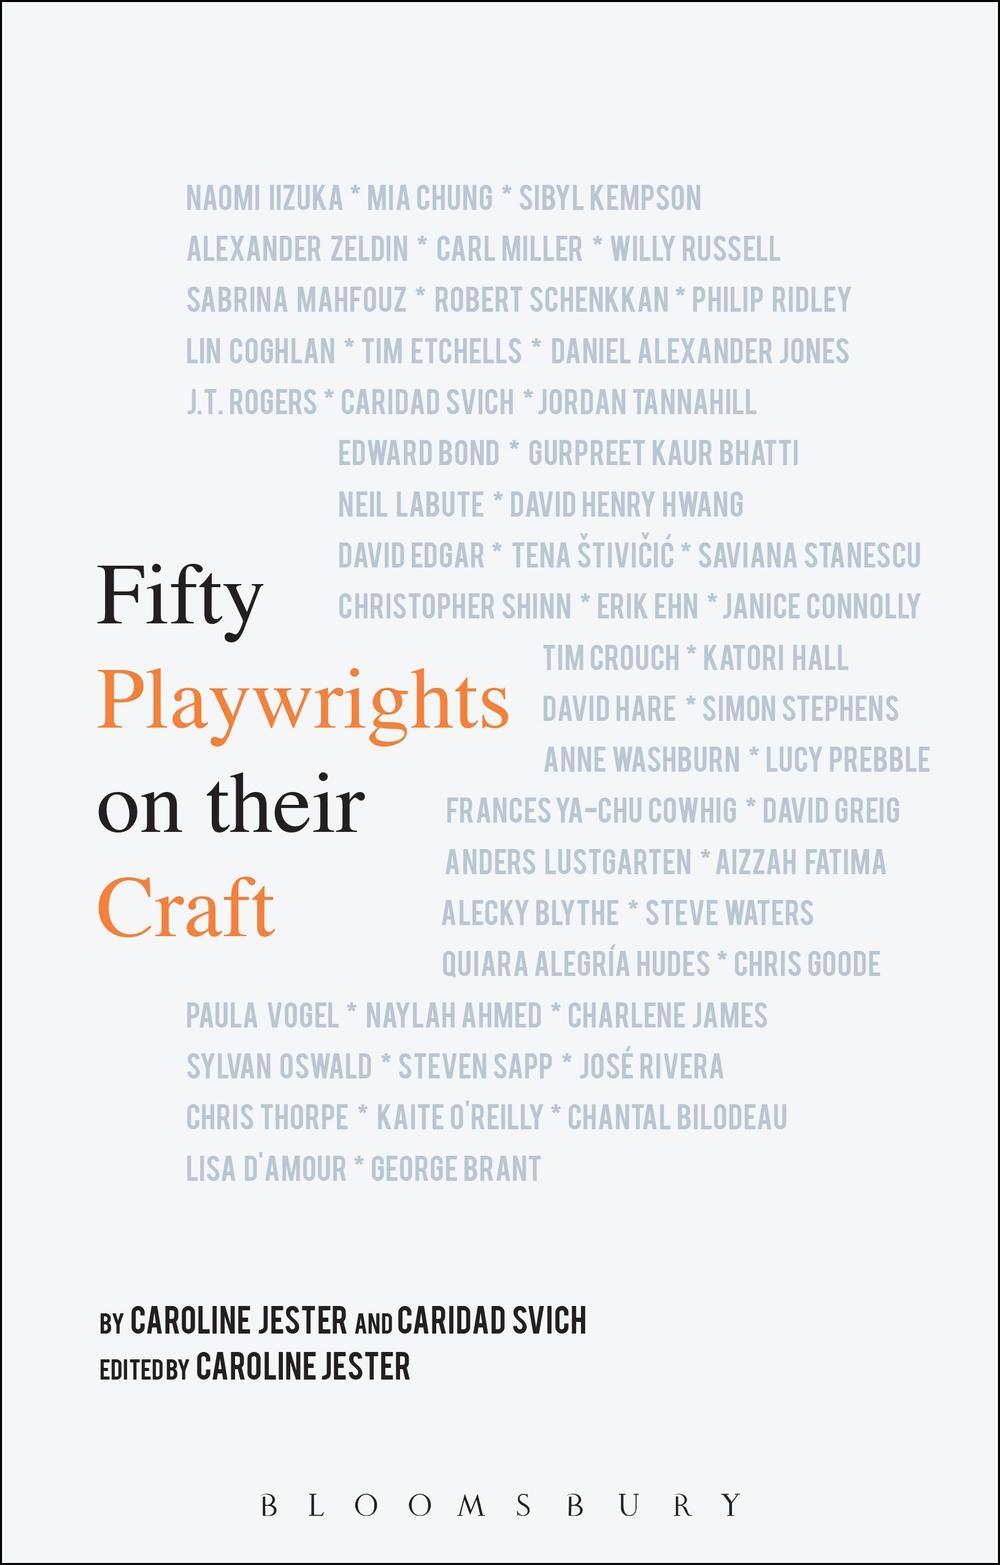 Fifty Playwrights on their Craft